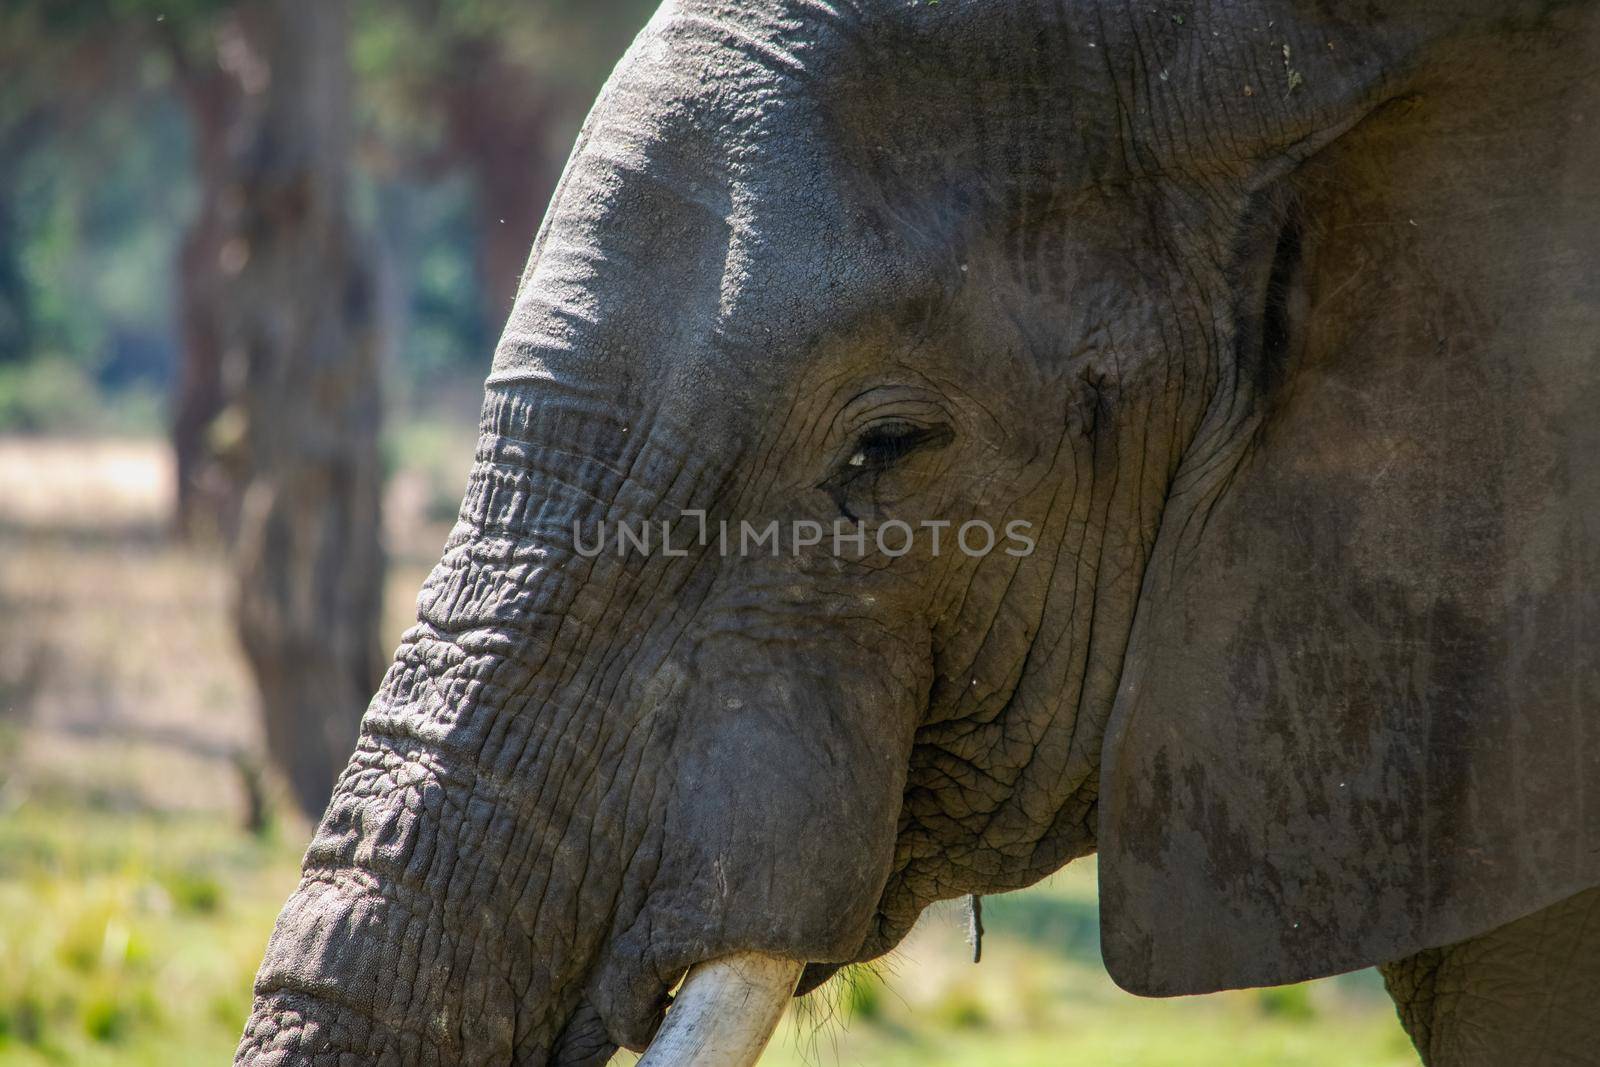 Amazing close up of the face of a huge elephant moving in the waters of an African river by silentstock639